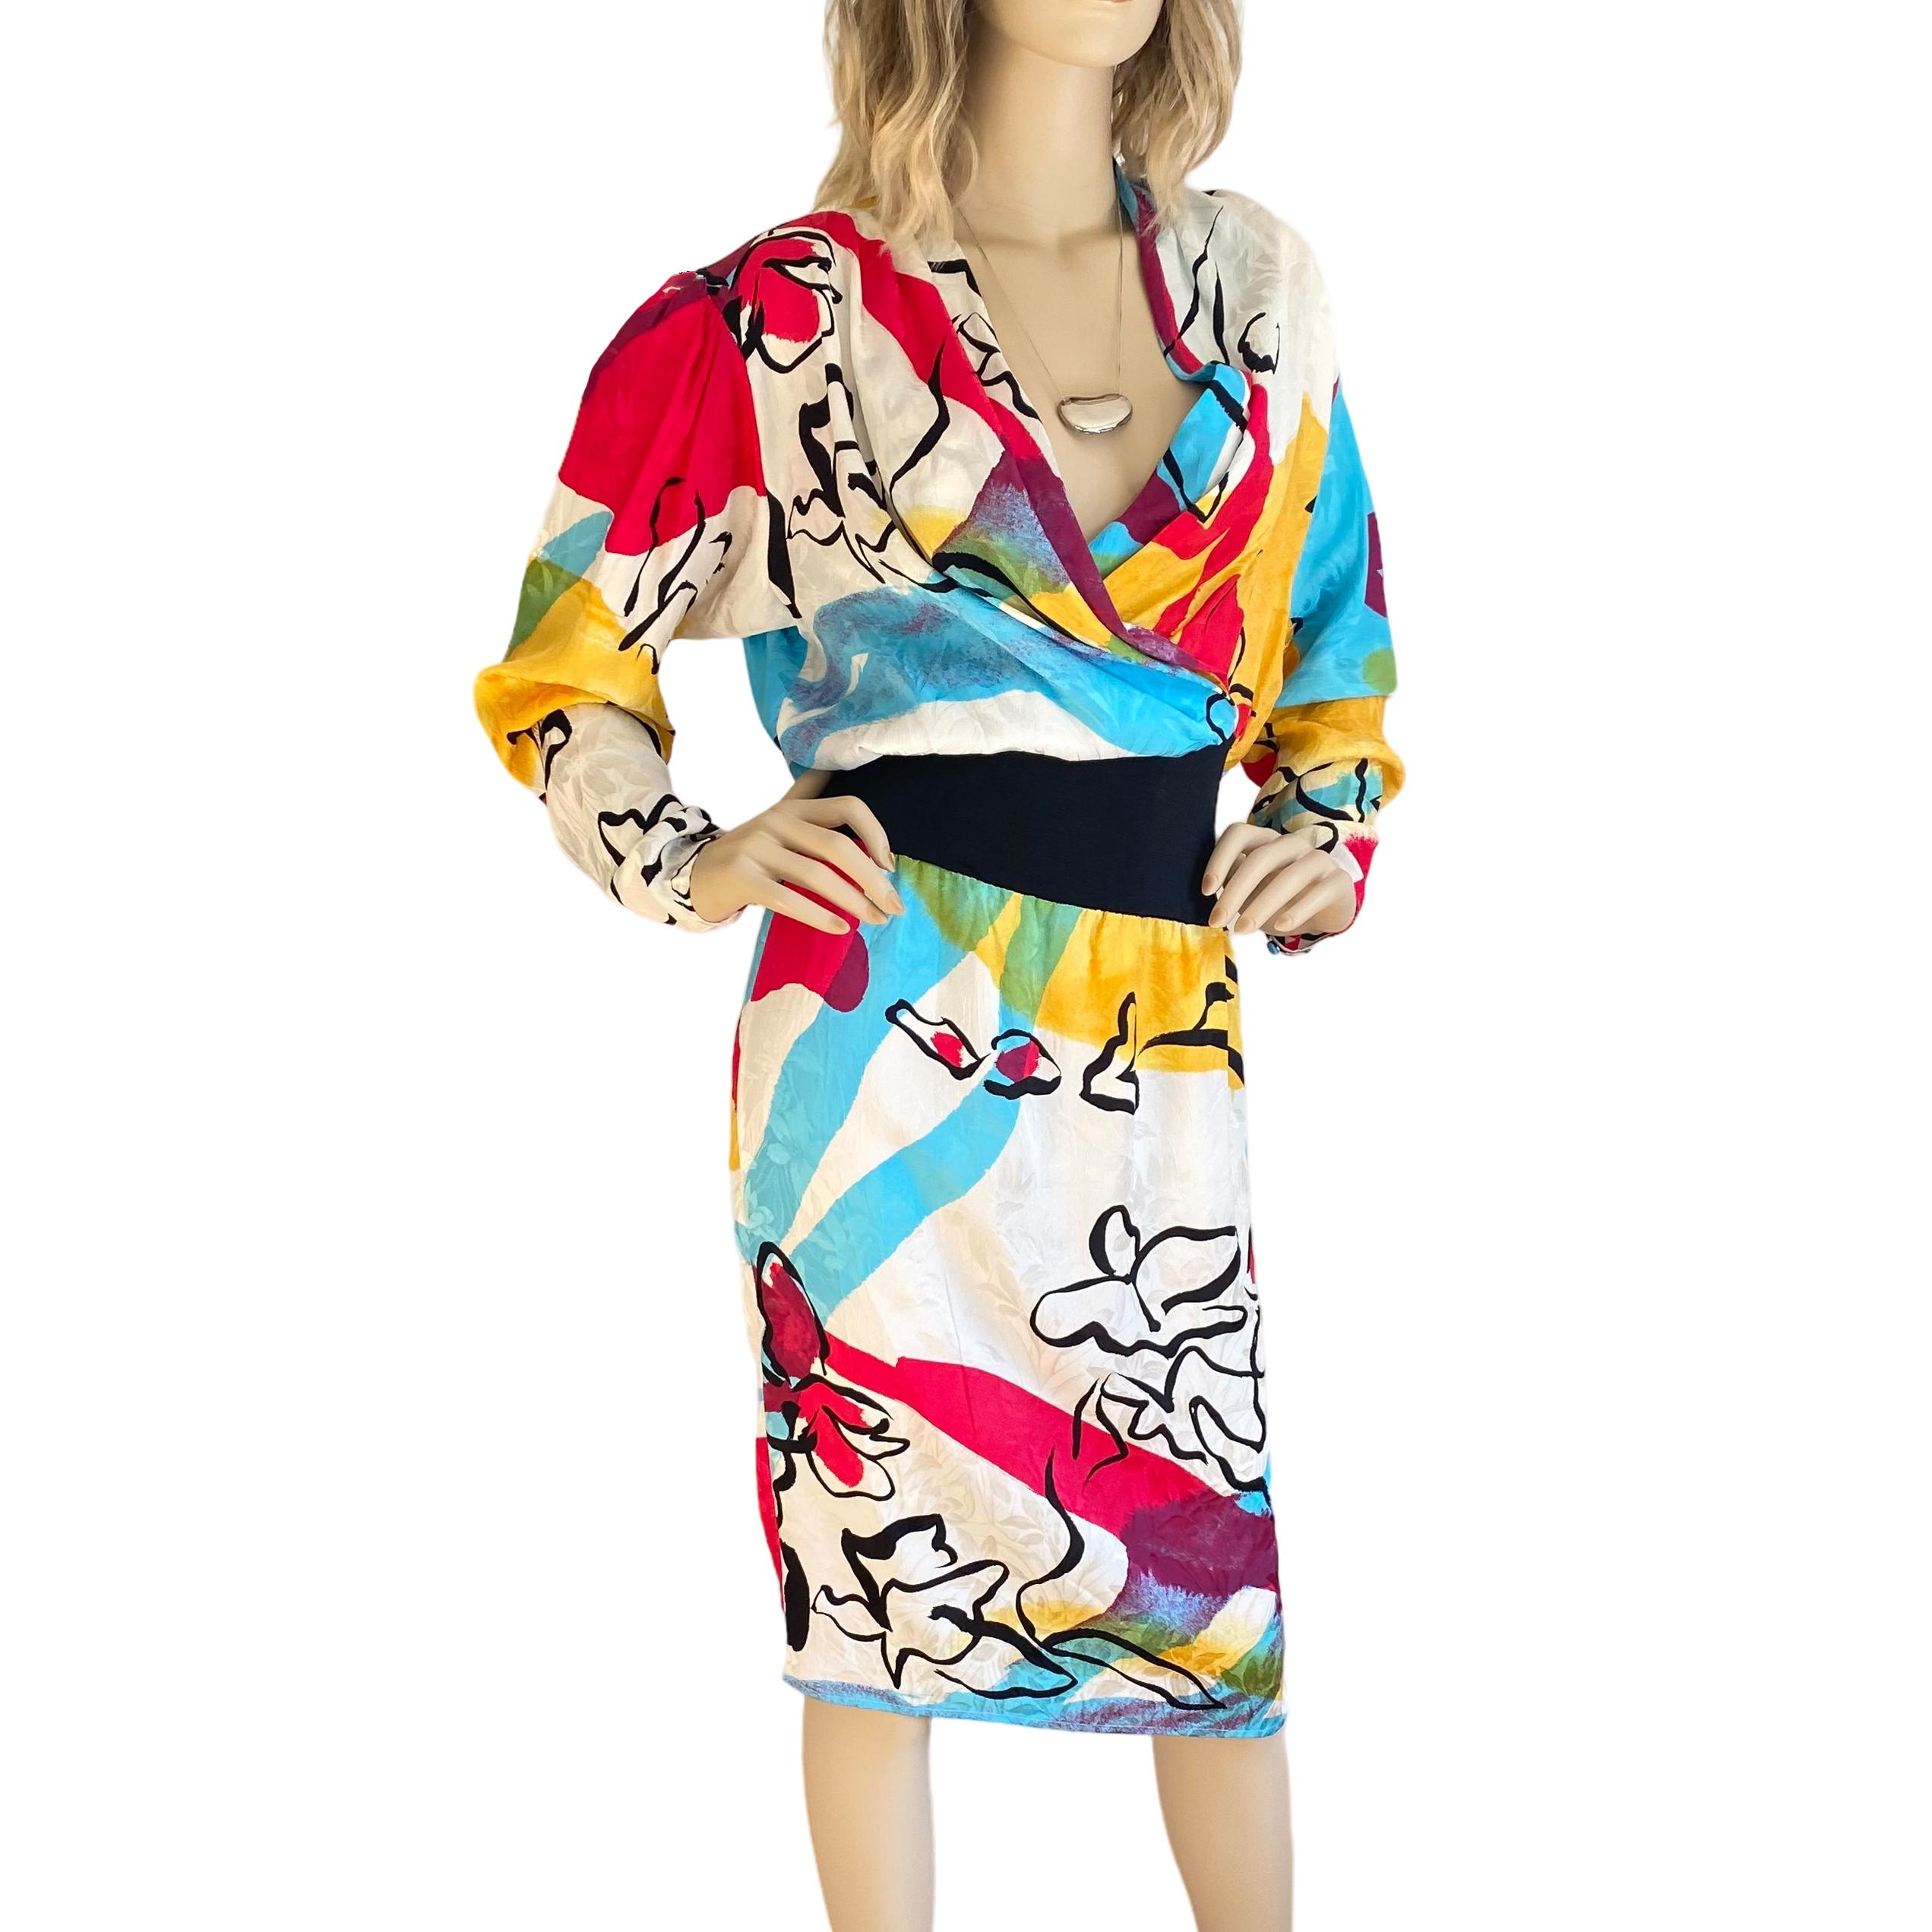 Splash abstract printed silk jacquard and silk knit waist.
Approximate measurements for this size 8: 46